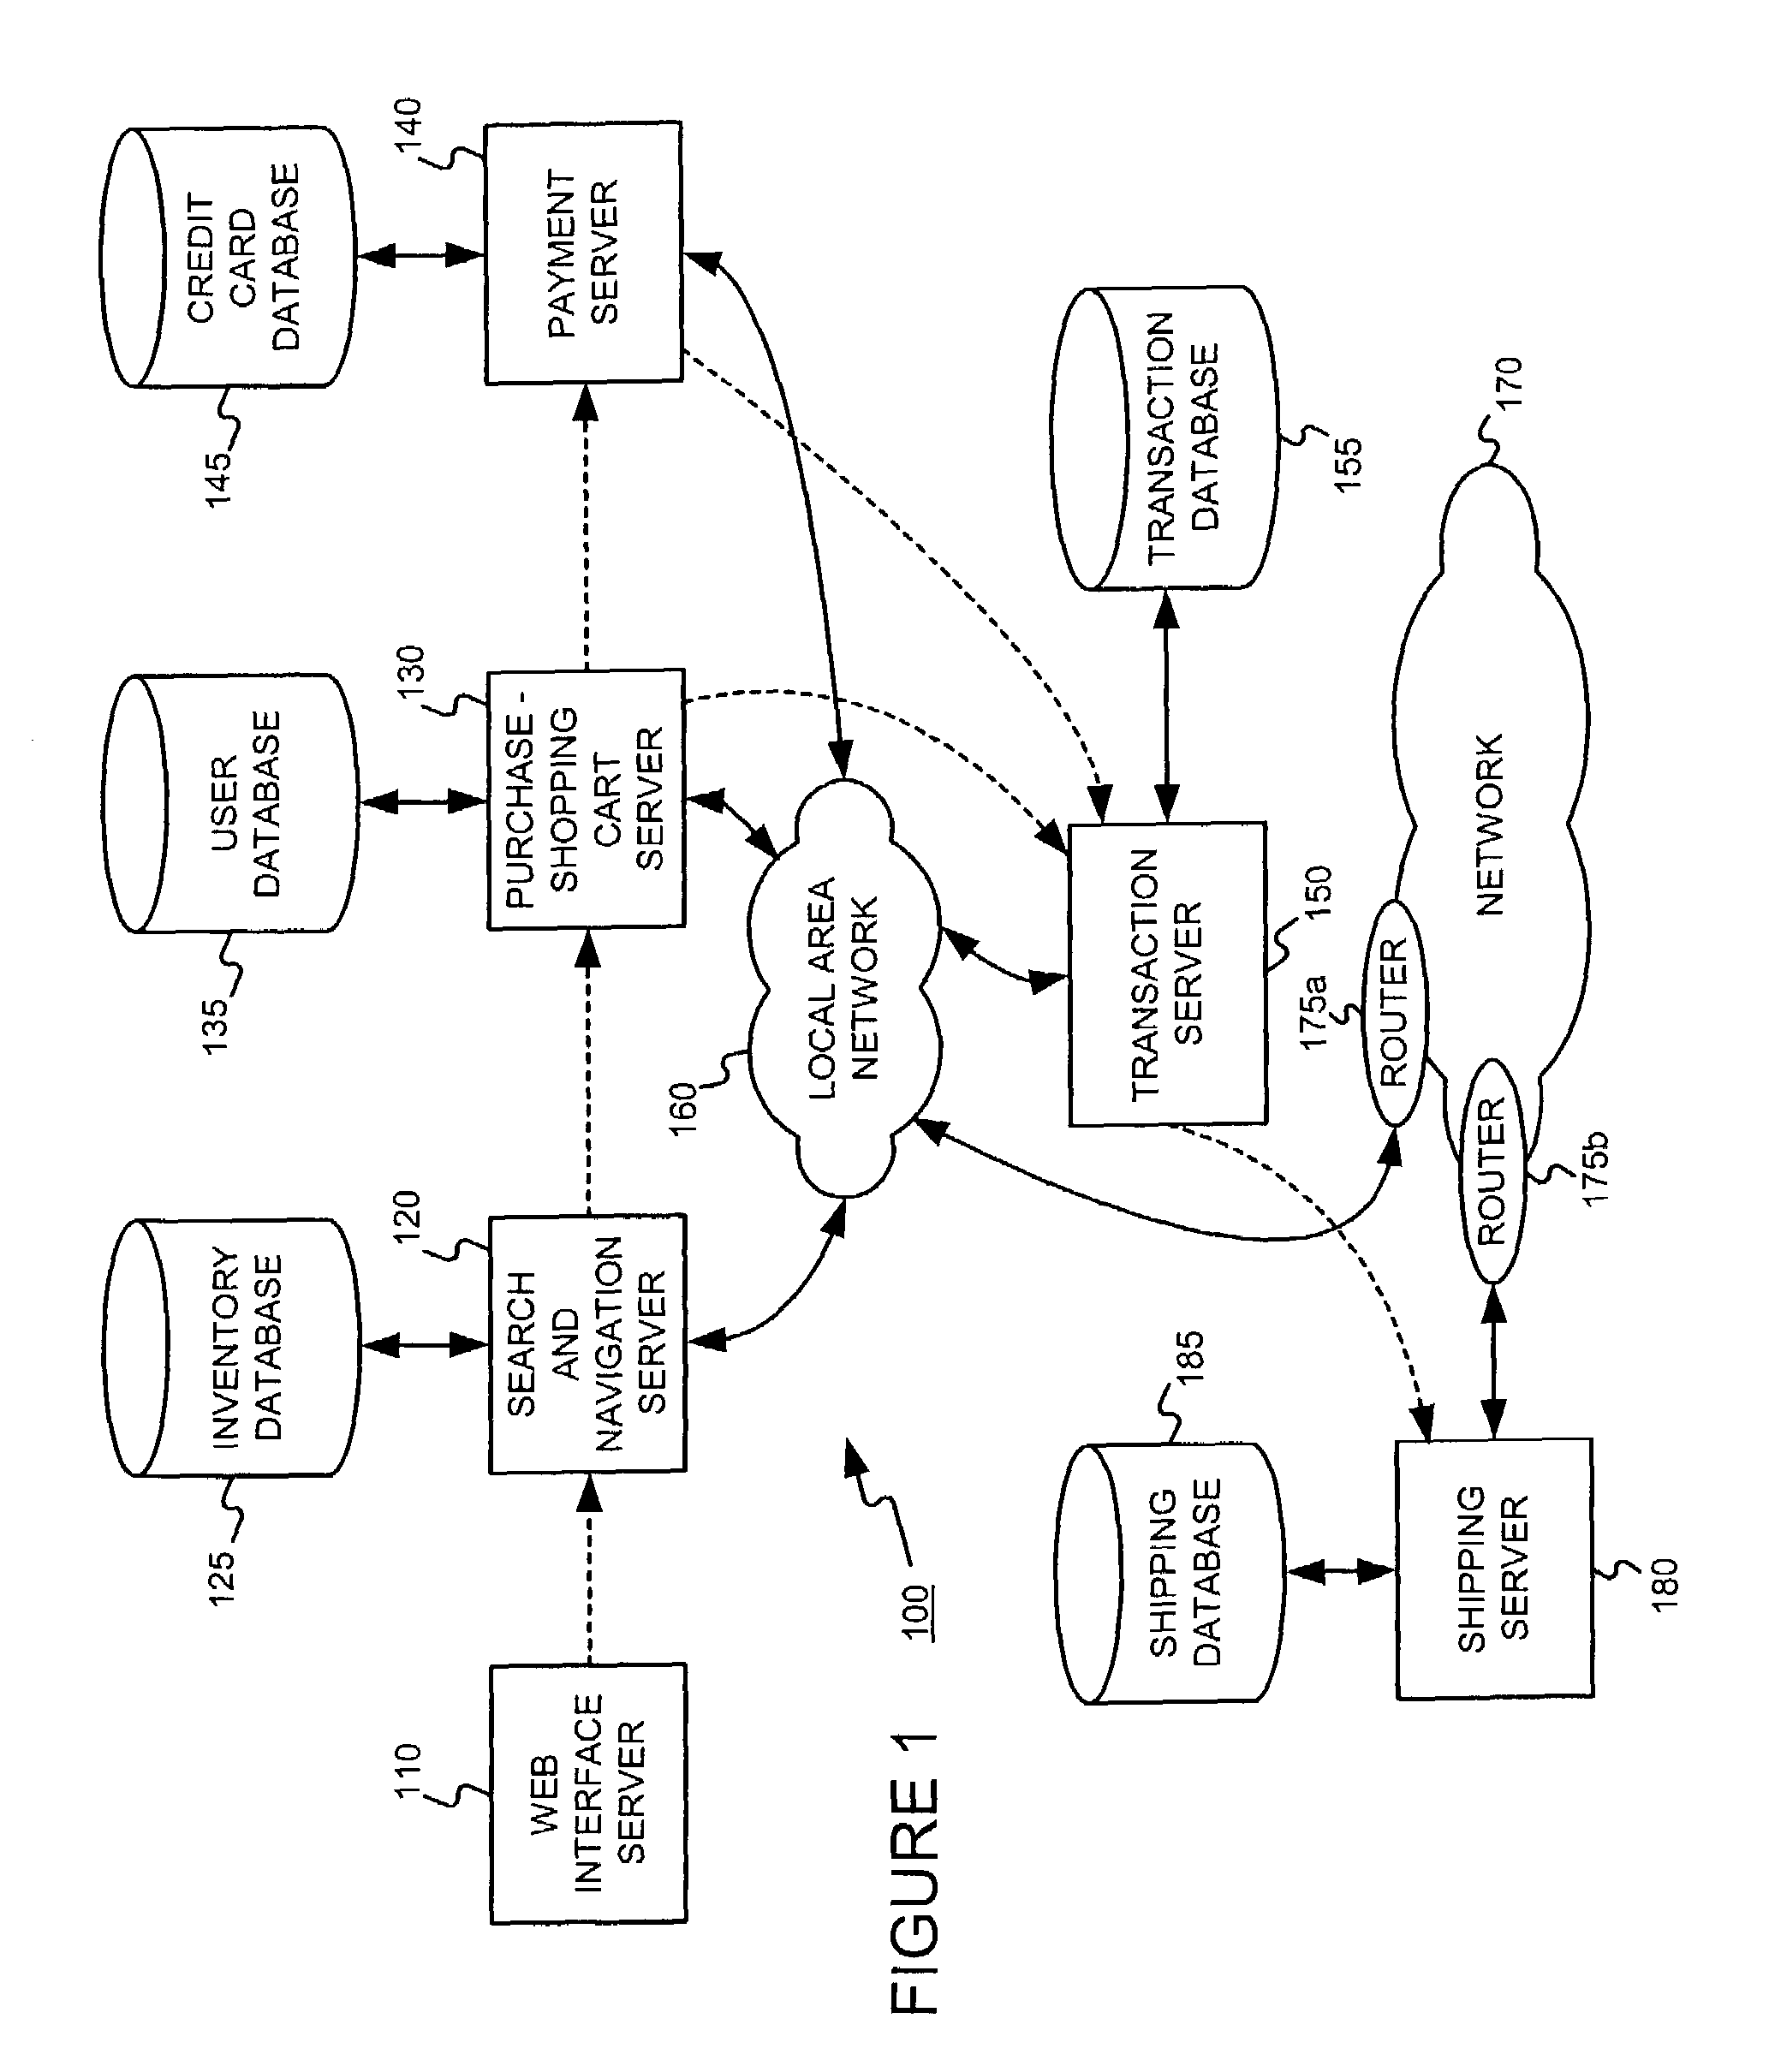 Distributing queries and combining query responses in a fault and performance monitoring system using distributed data gathering and storage